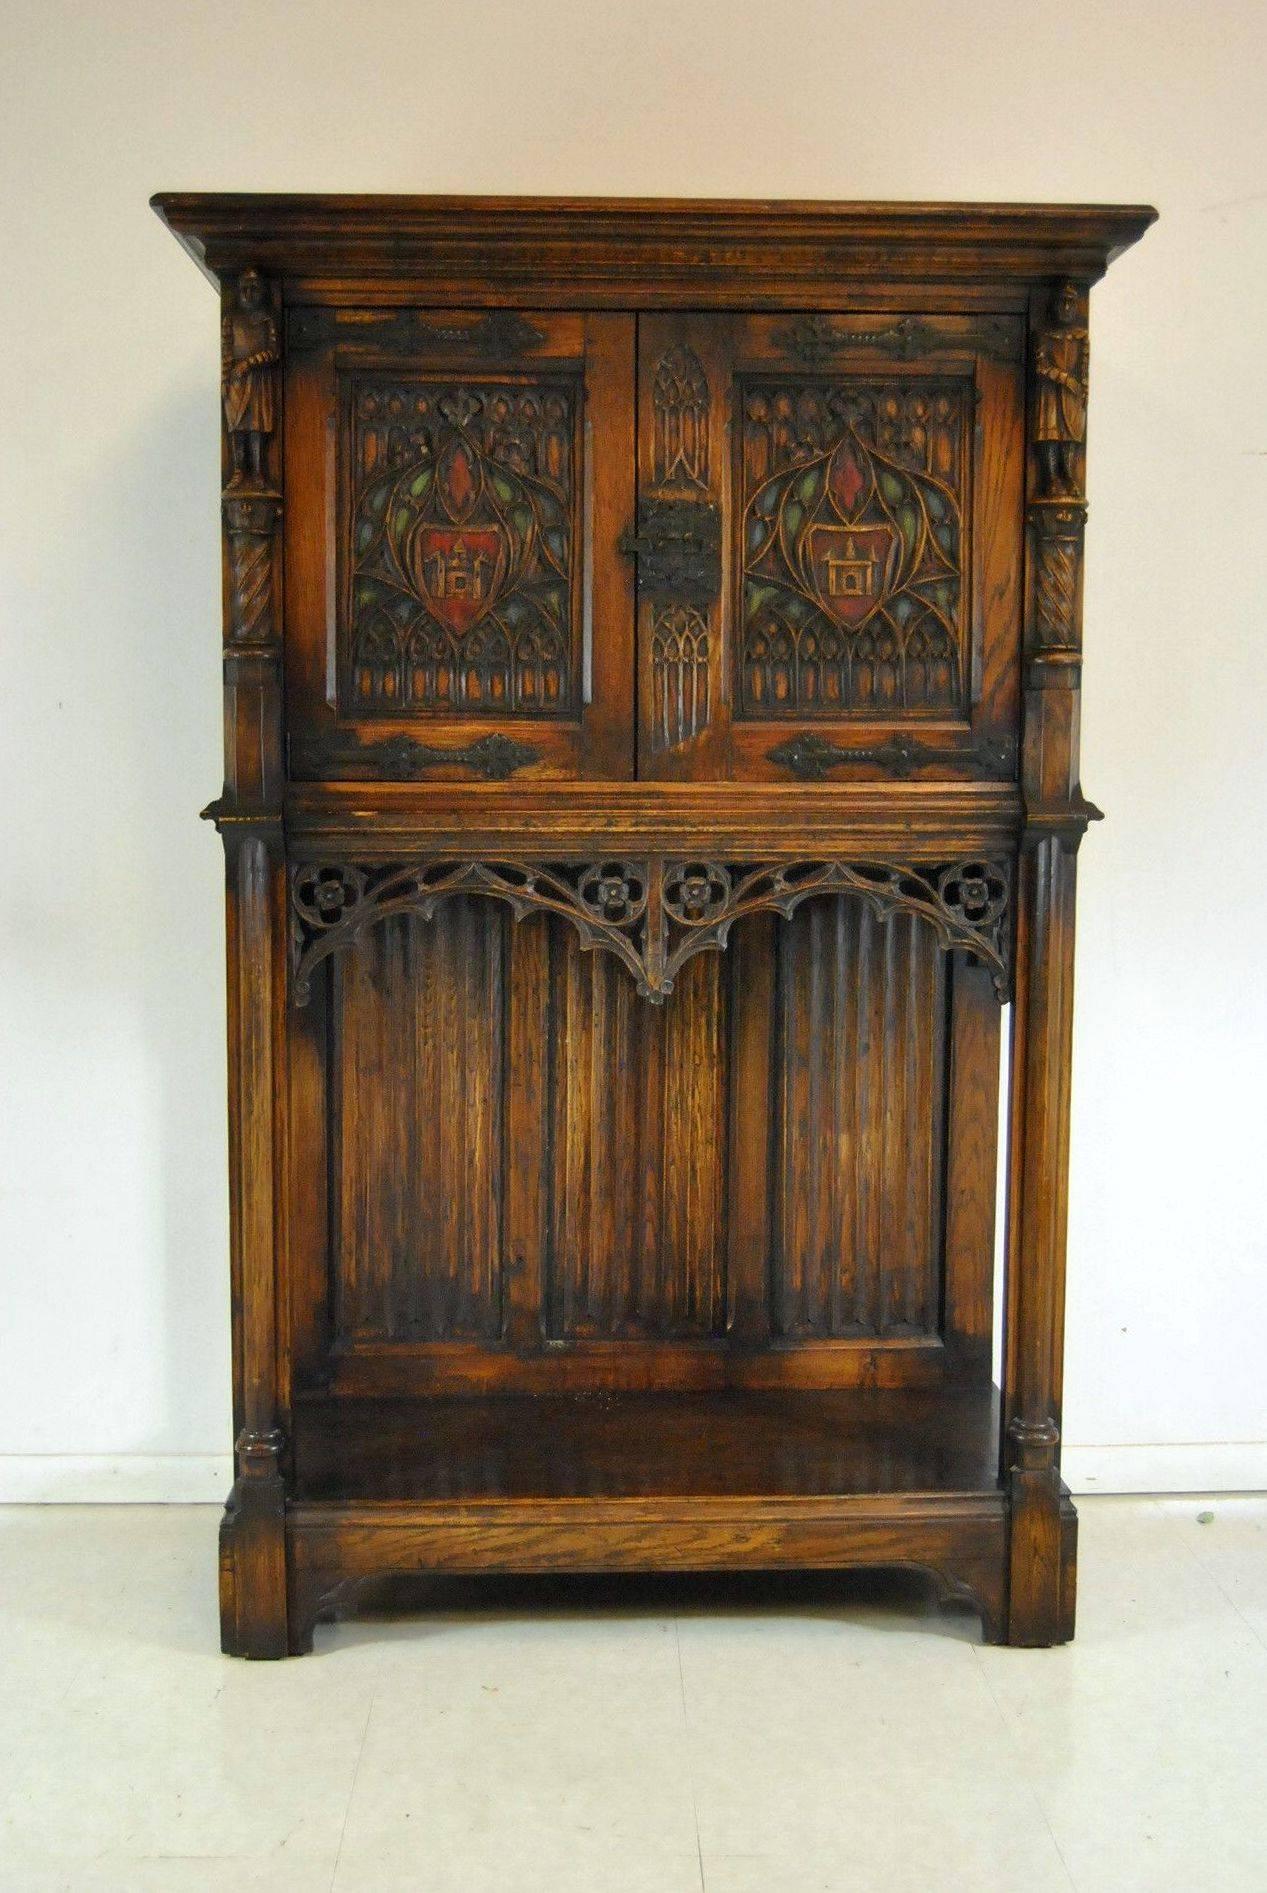 A handsome Gothic Revival oak knights cupboard, server or tall chest. This piece is breath taking with the golden brown patina. The upper section has twin doors featuring centring shields flanked by figural knights on the sides. The knights each